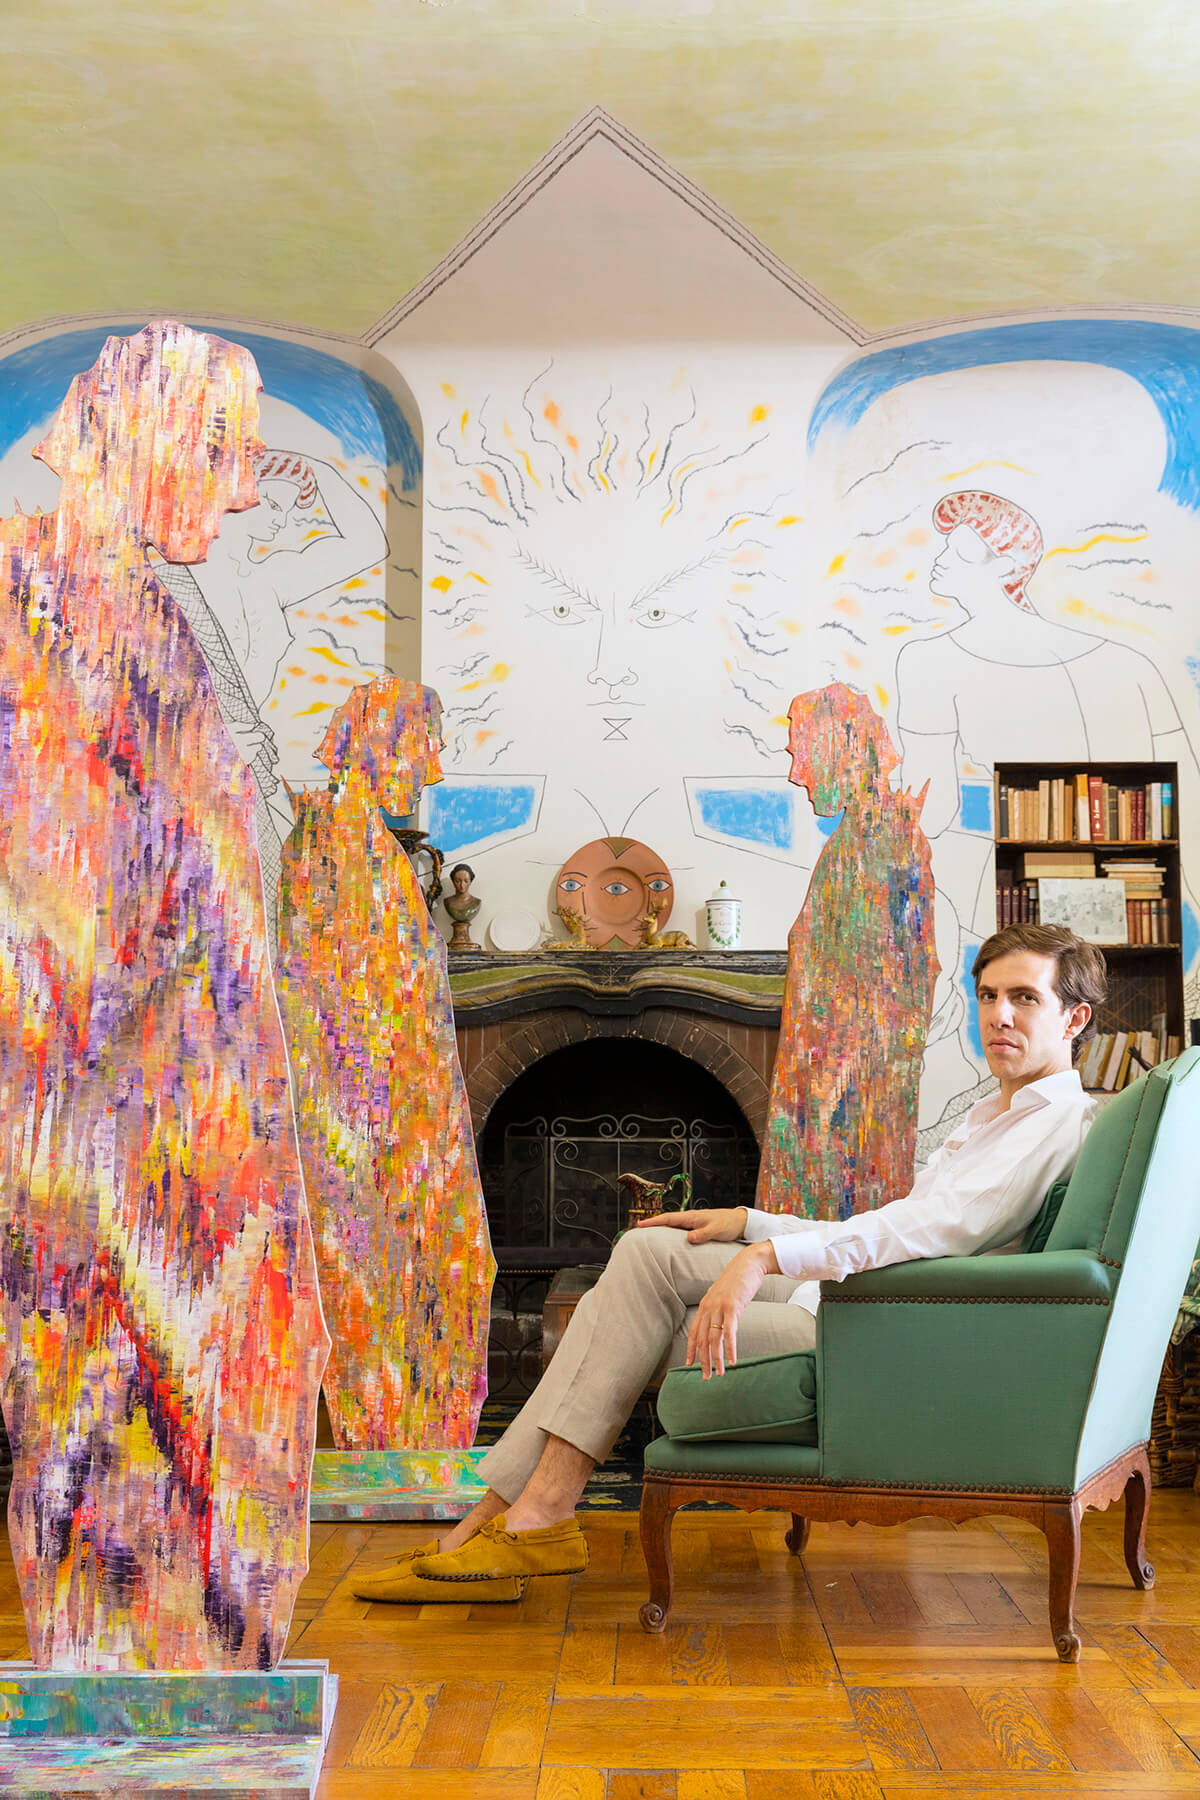 artist Sassan Behnam-Bakhtiar seated in a green arm chair surrounded by colourful sculptures of men and a painted mural